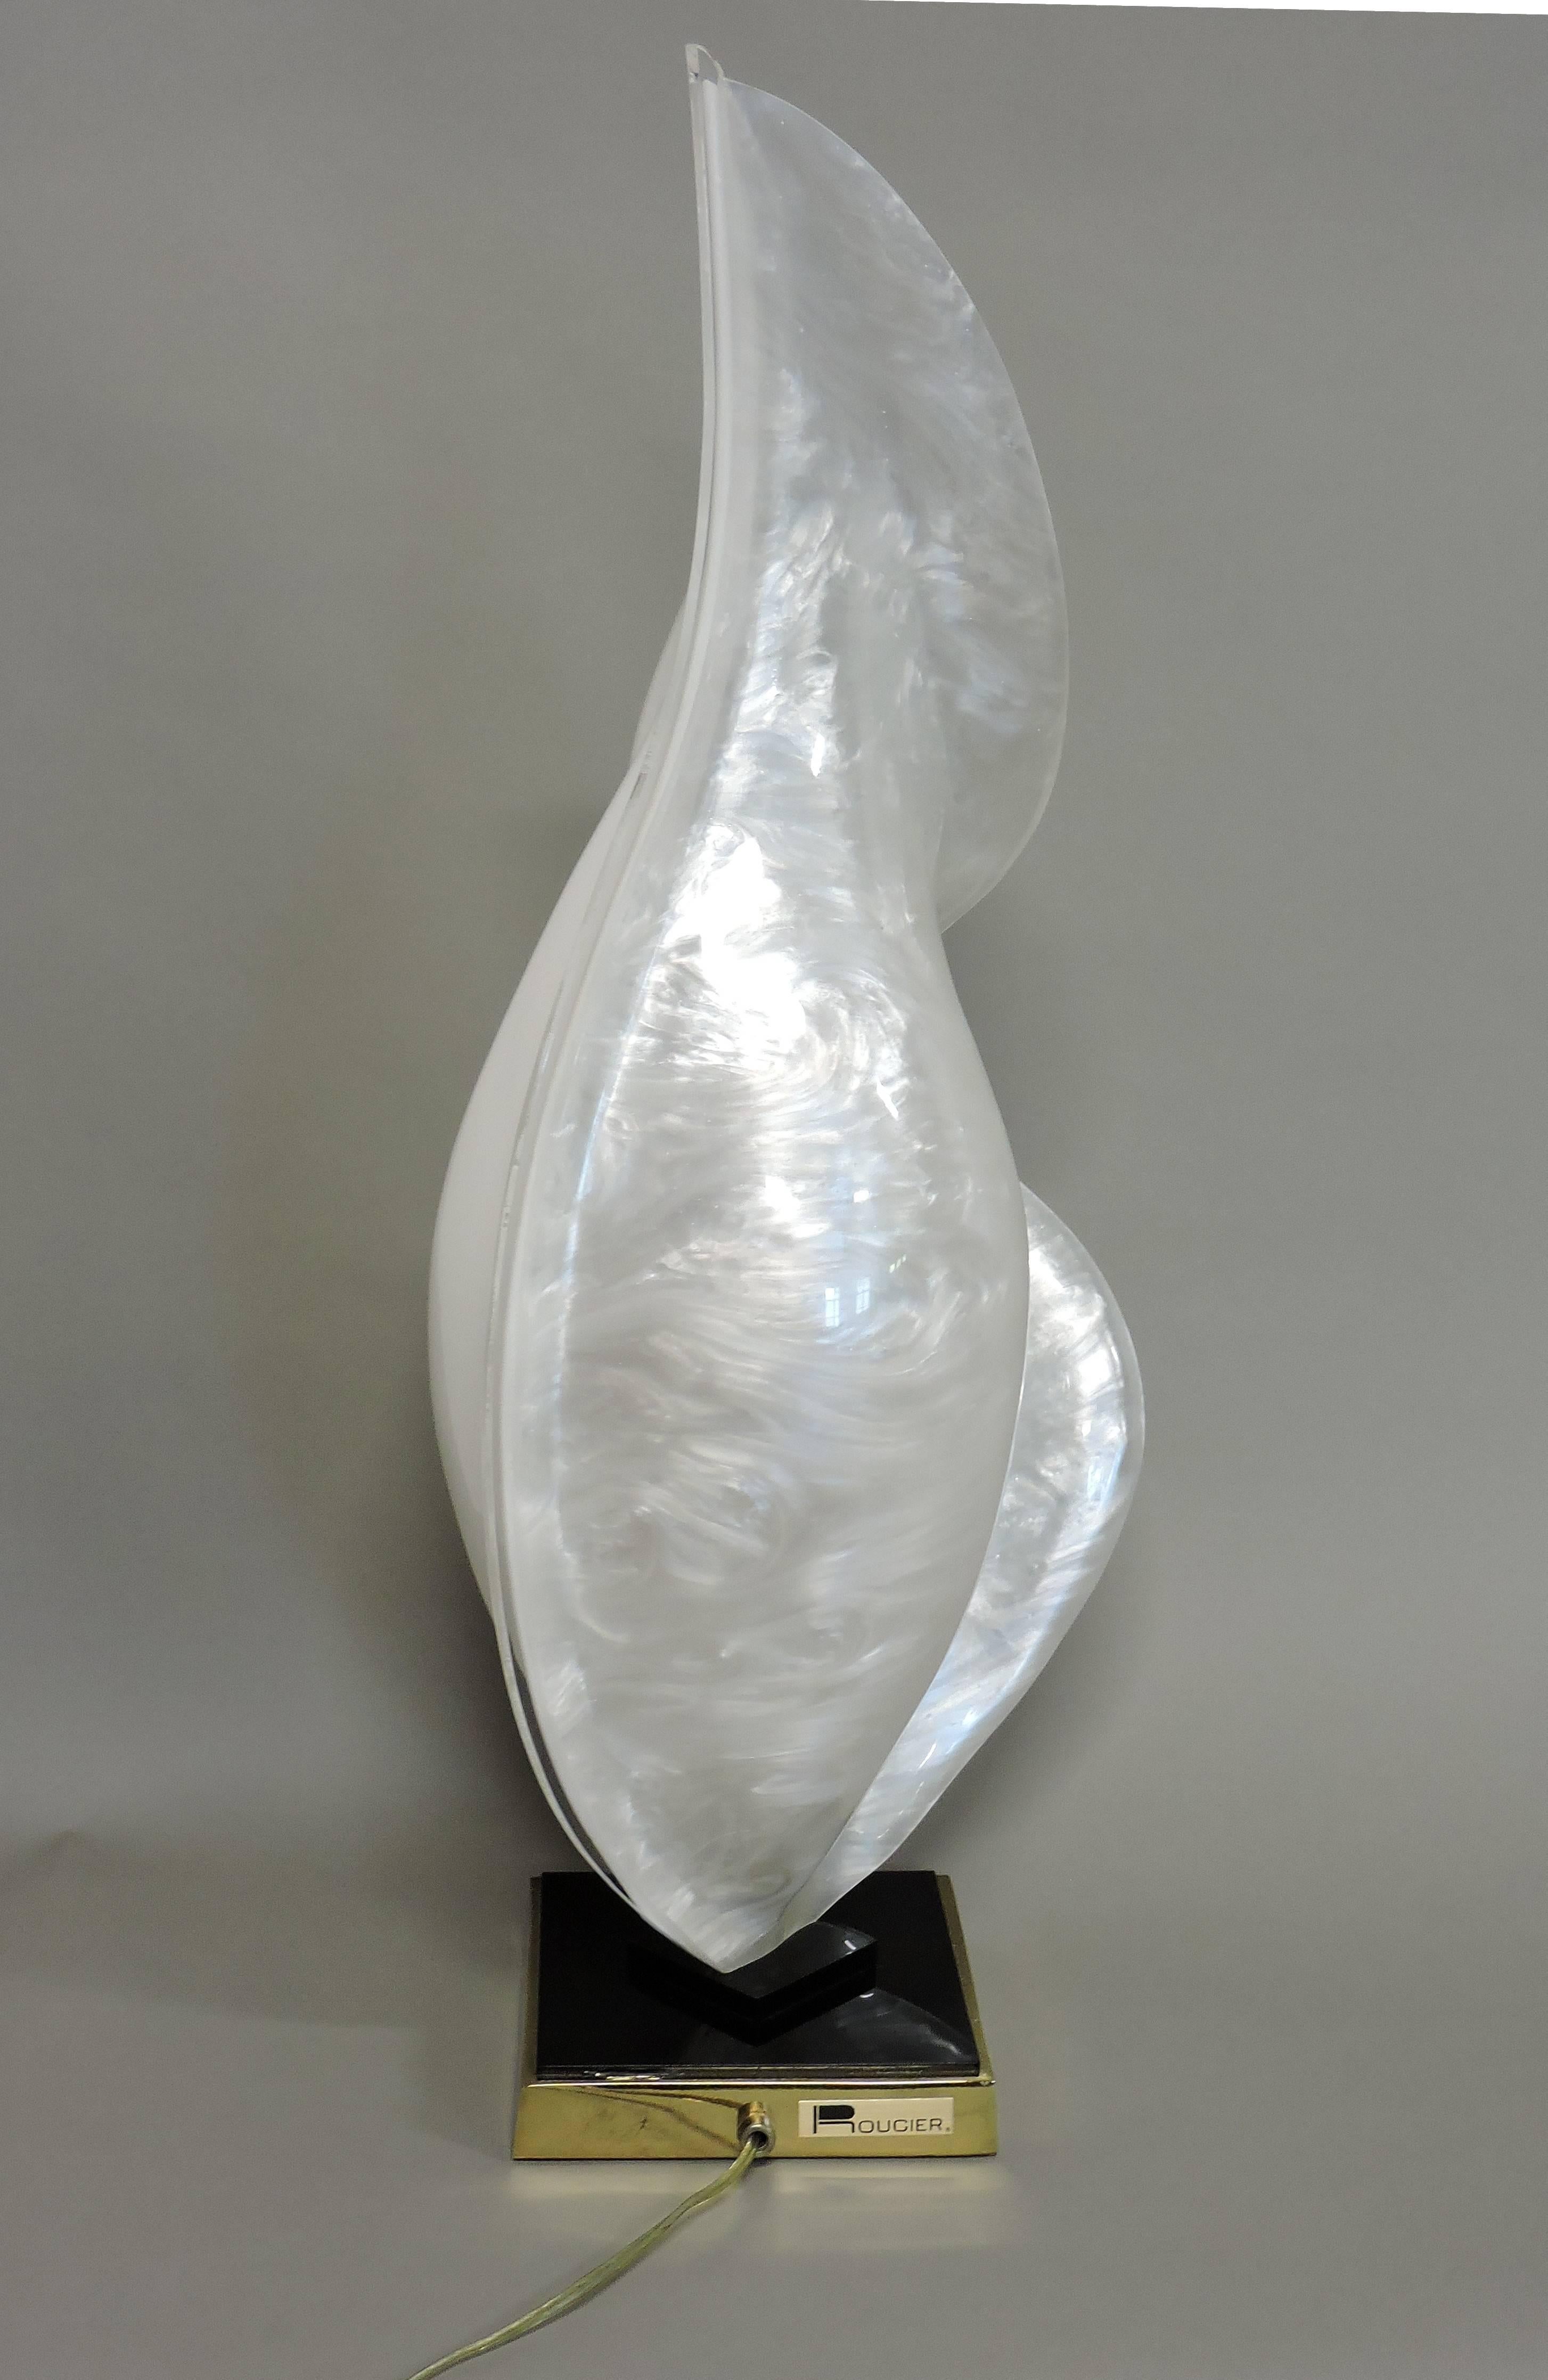 Unique free-form table lamp made by Rougier of Canada. This lamp is a combination of solid white and pearl white acrylic molded into a beautiful flowing shape. It has an inline on/off switch and takes a single bulb. Marked with Rougier label on base.